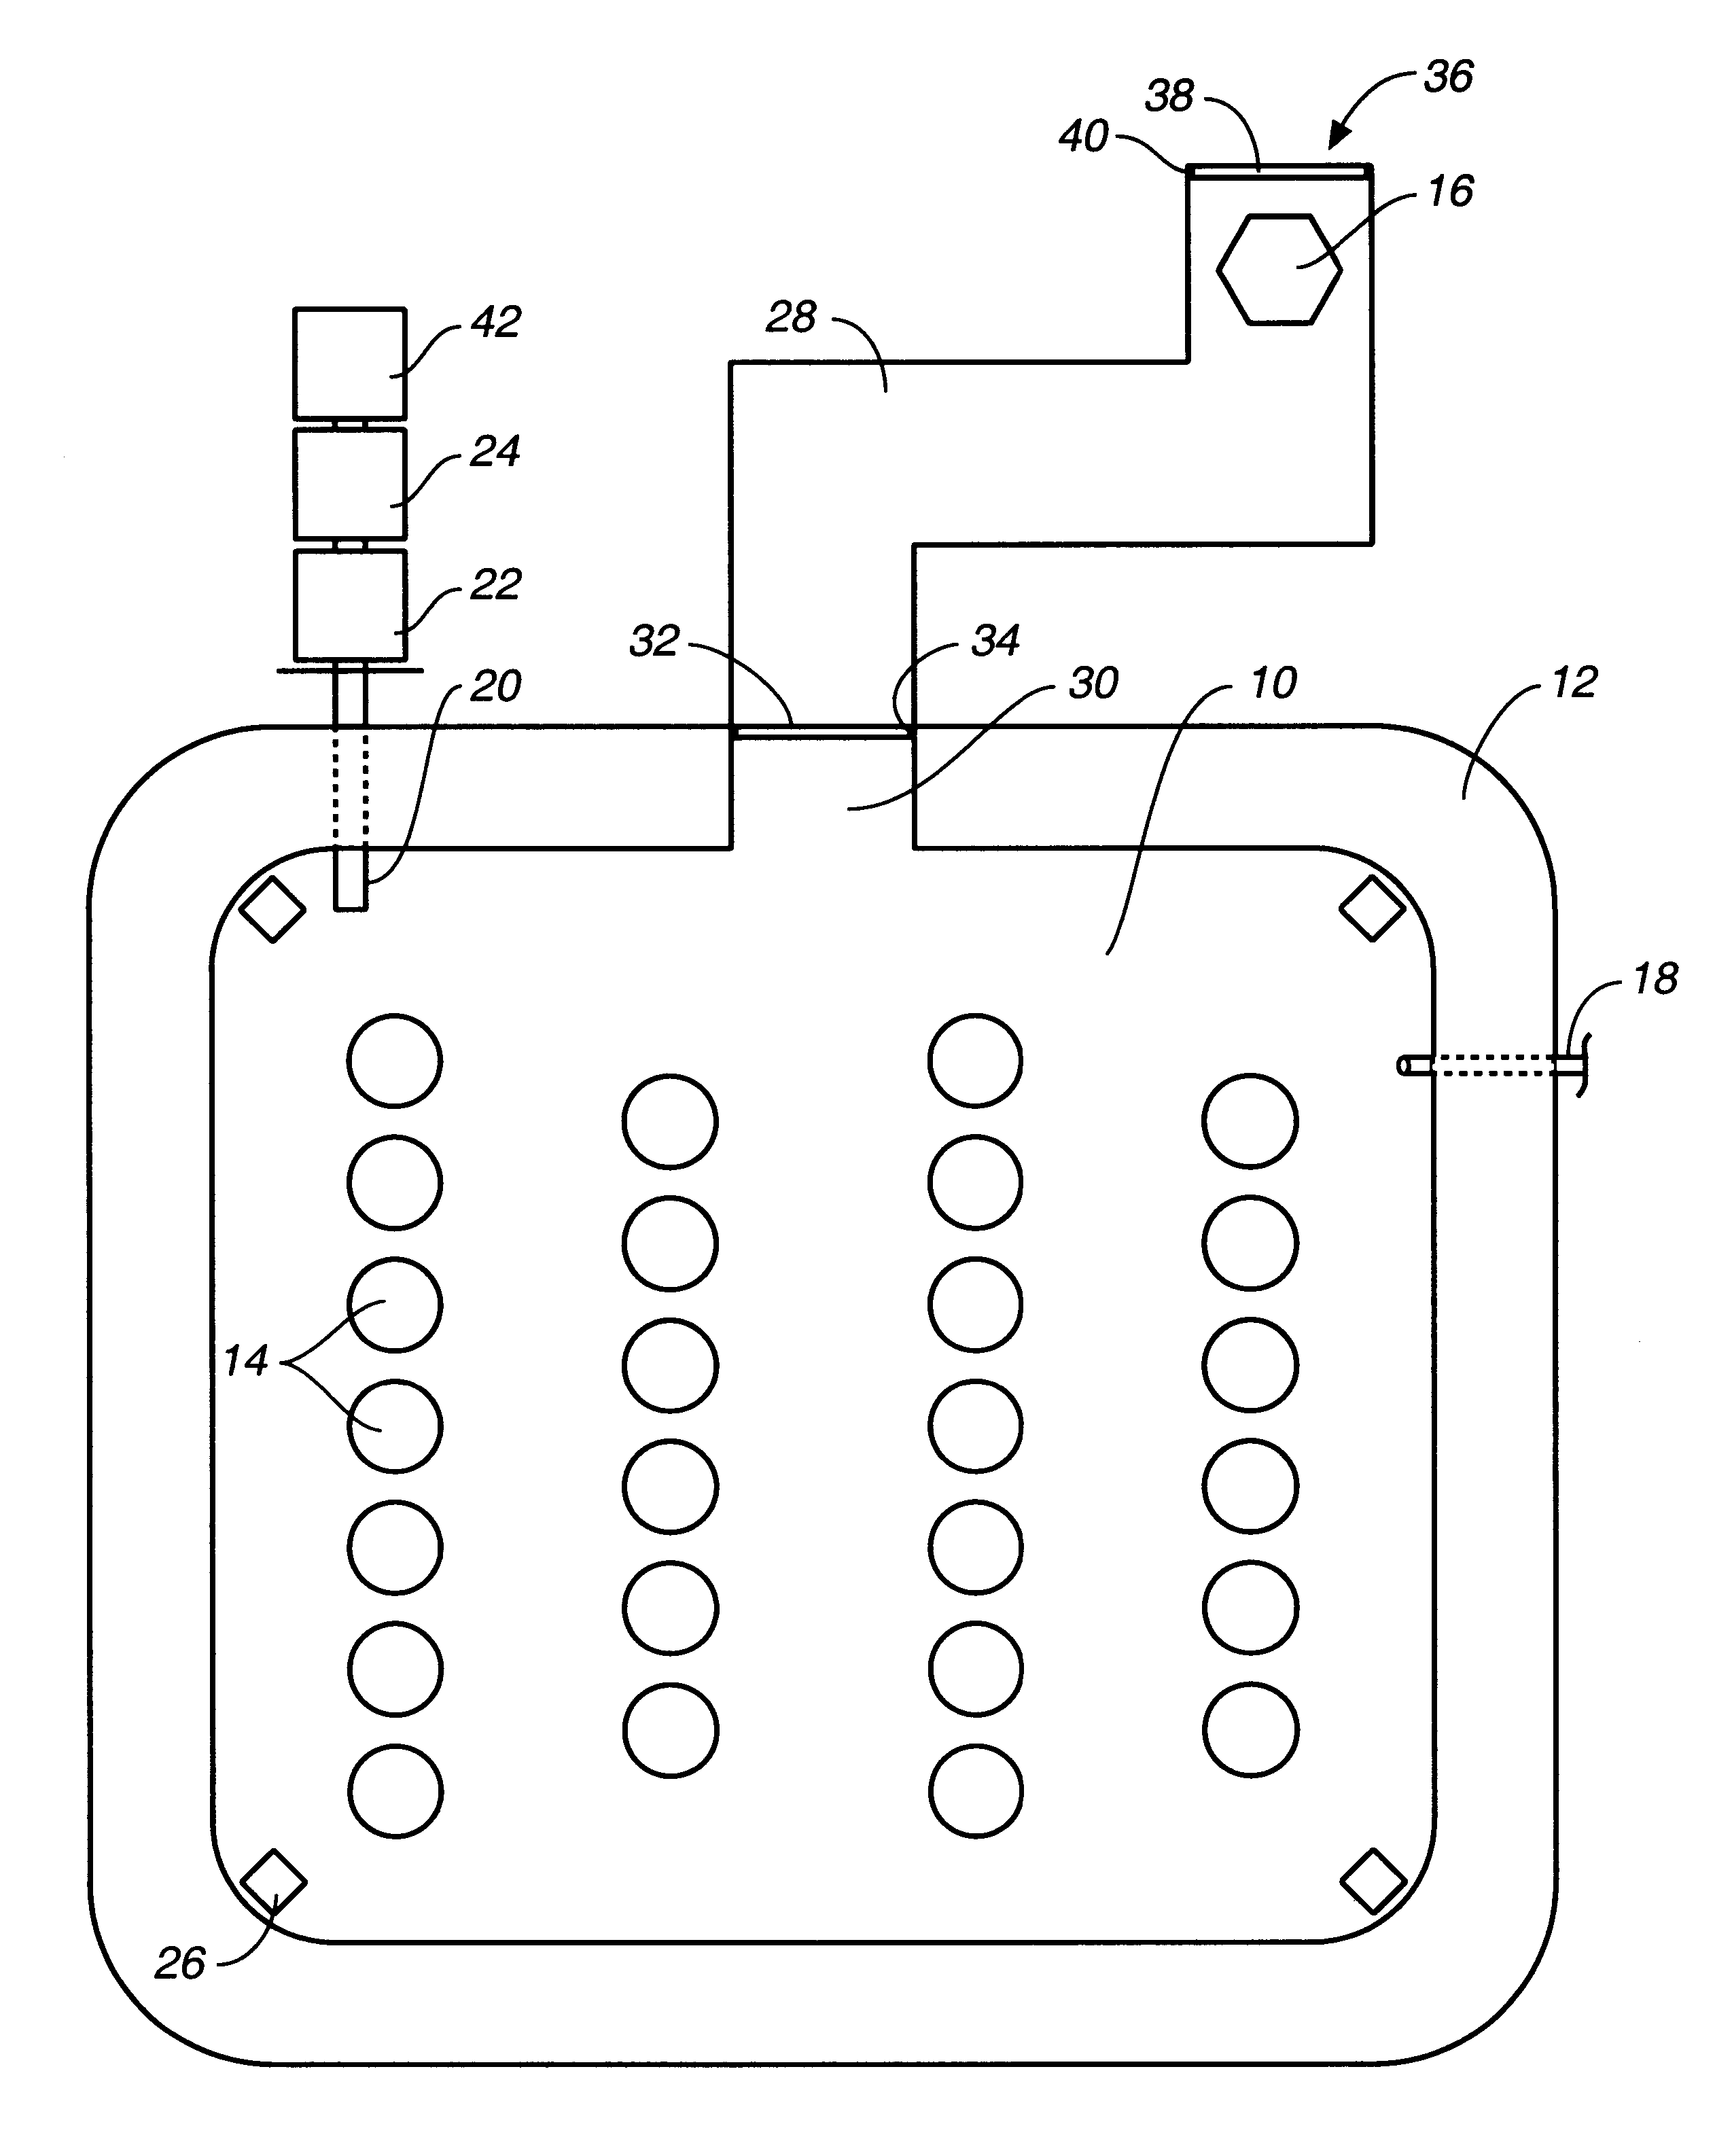 Method of using nuclear waste to produce heat and power